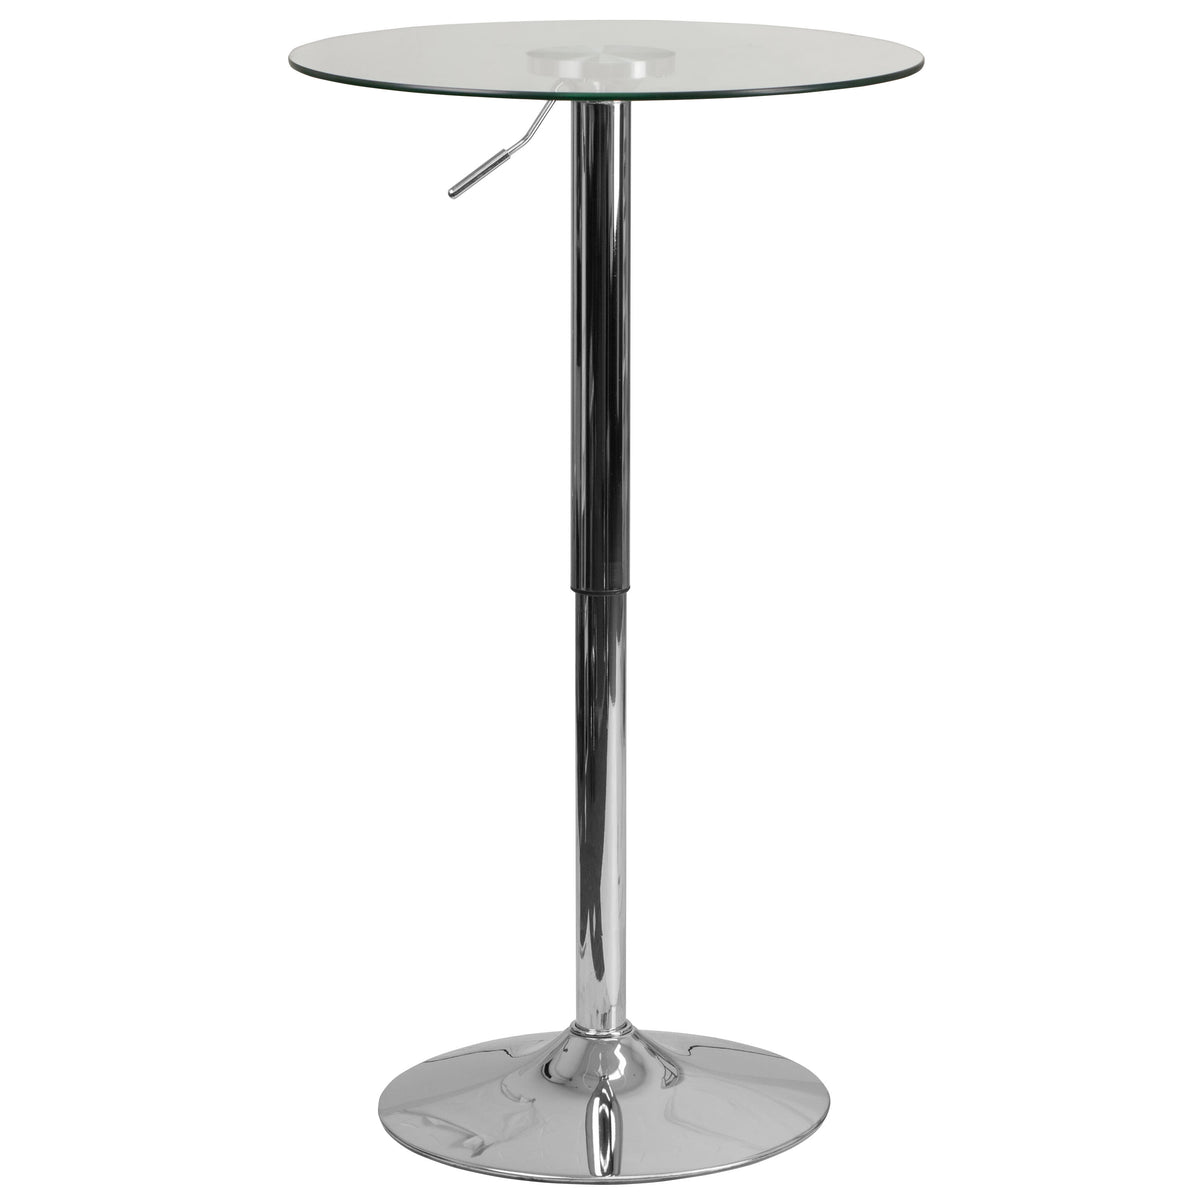 23.5inch Round Adjustable Height Glass Table (Adjustable Range 33.5inch - 41inch)